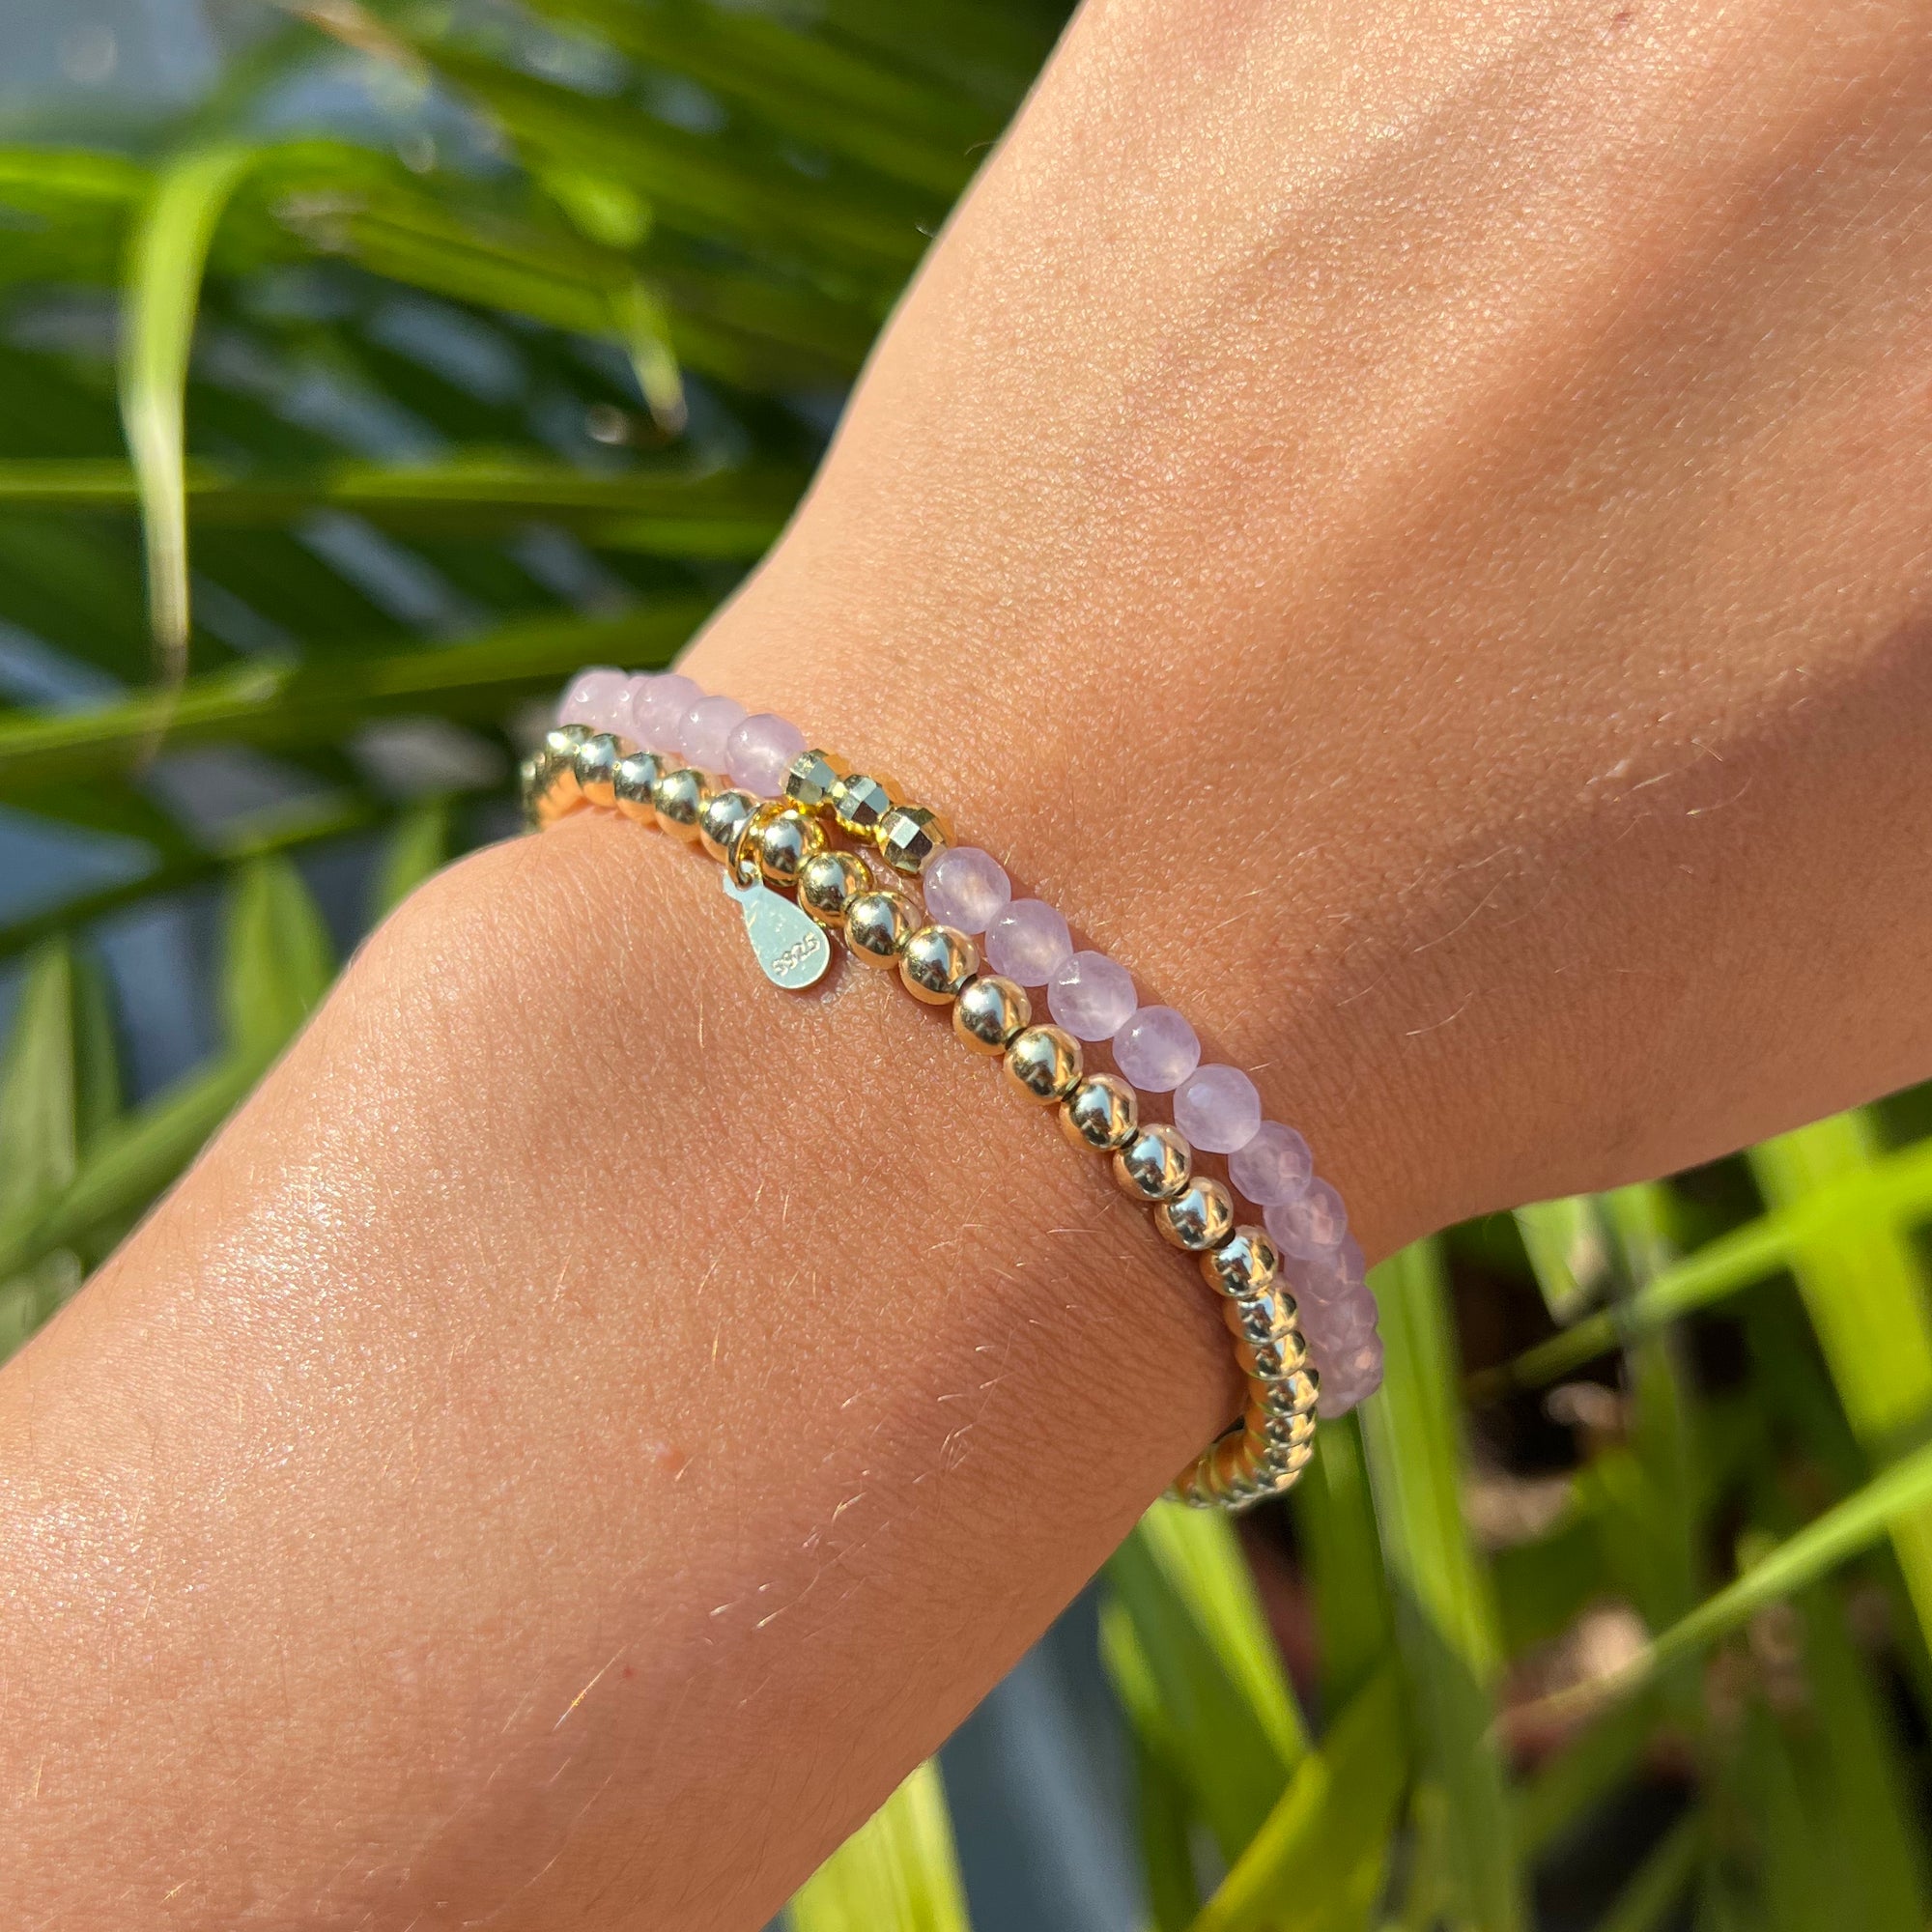 lavender jade and gold plated beads stacking bracelets 4mm